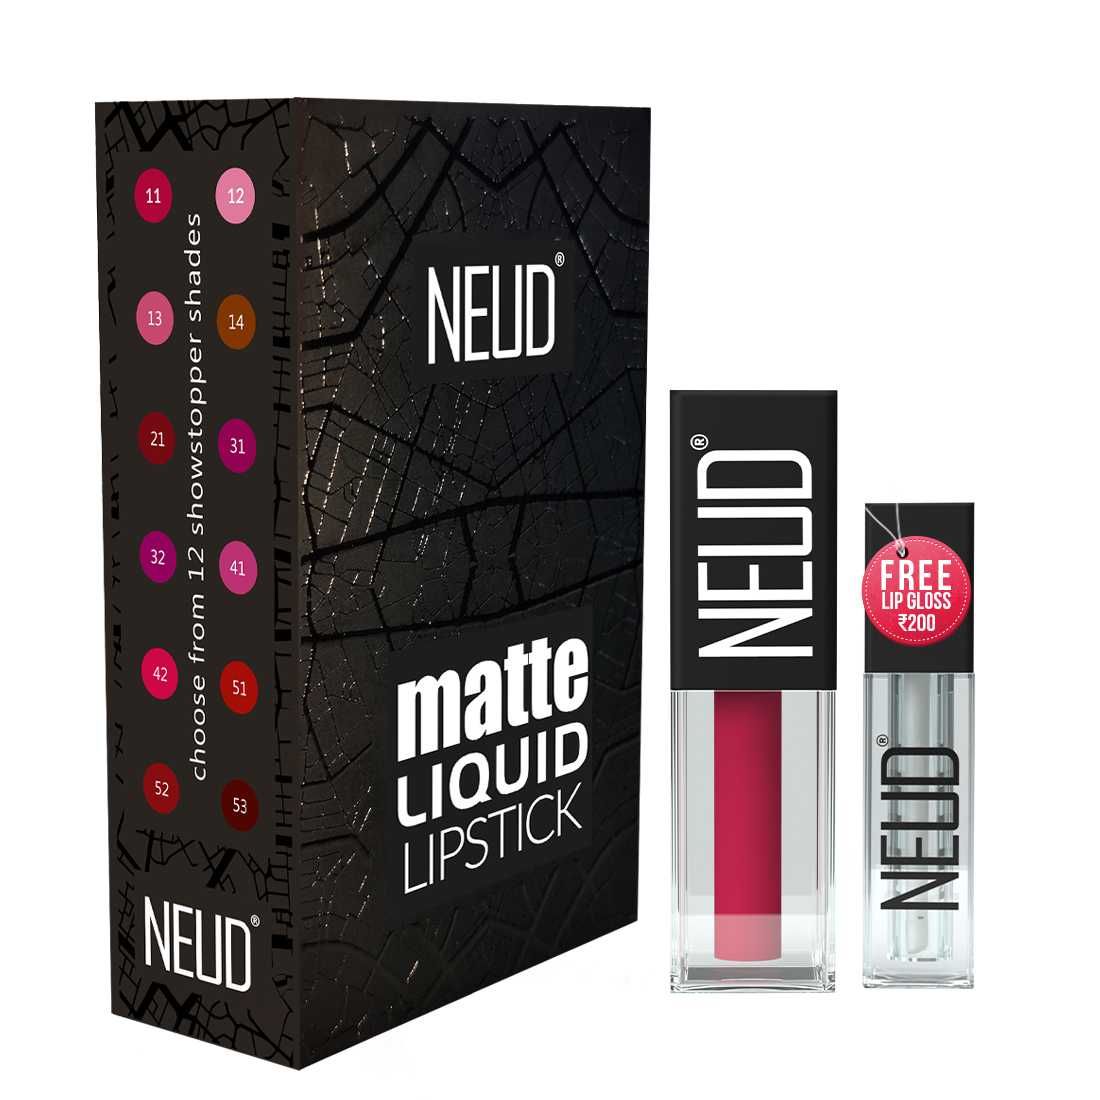 Buy NEUD Matte Liquid Lipstick Hottie Crush with Jojoba Oil, Vitamin E and Almond Oil - Smudge Proof 12-hour Stay Formula with Free Lip Gloss - Purplle